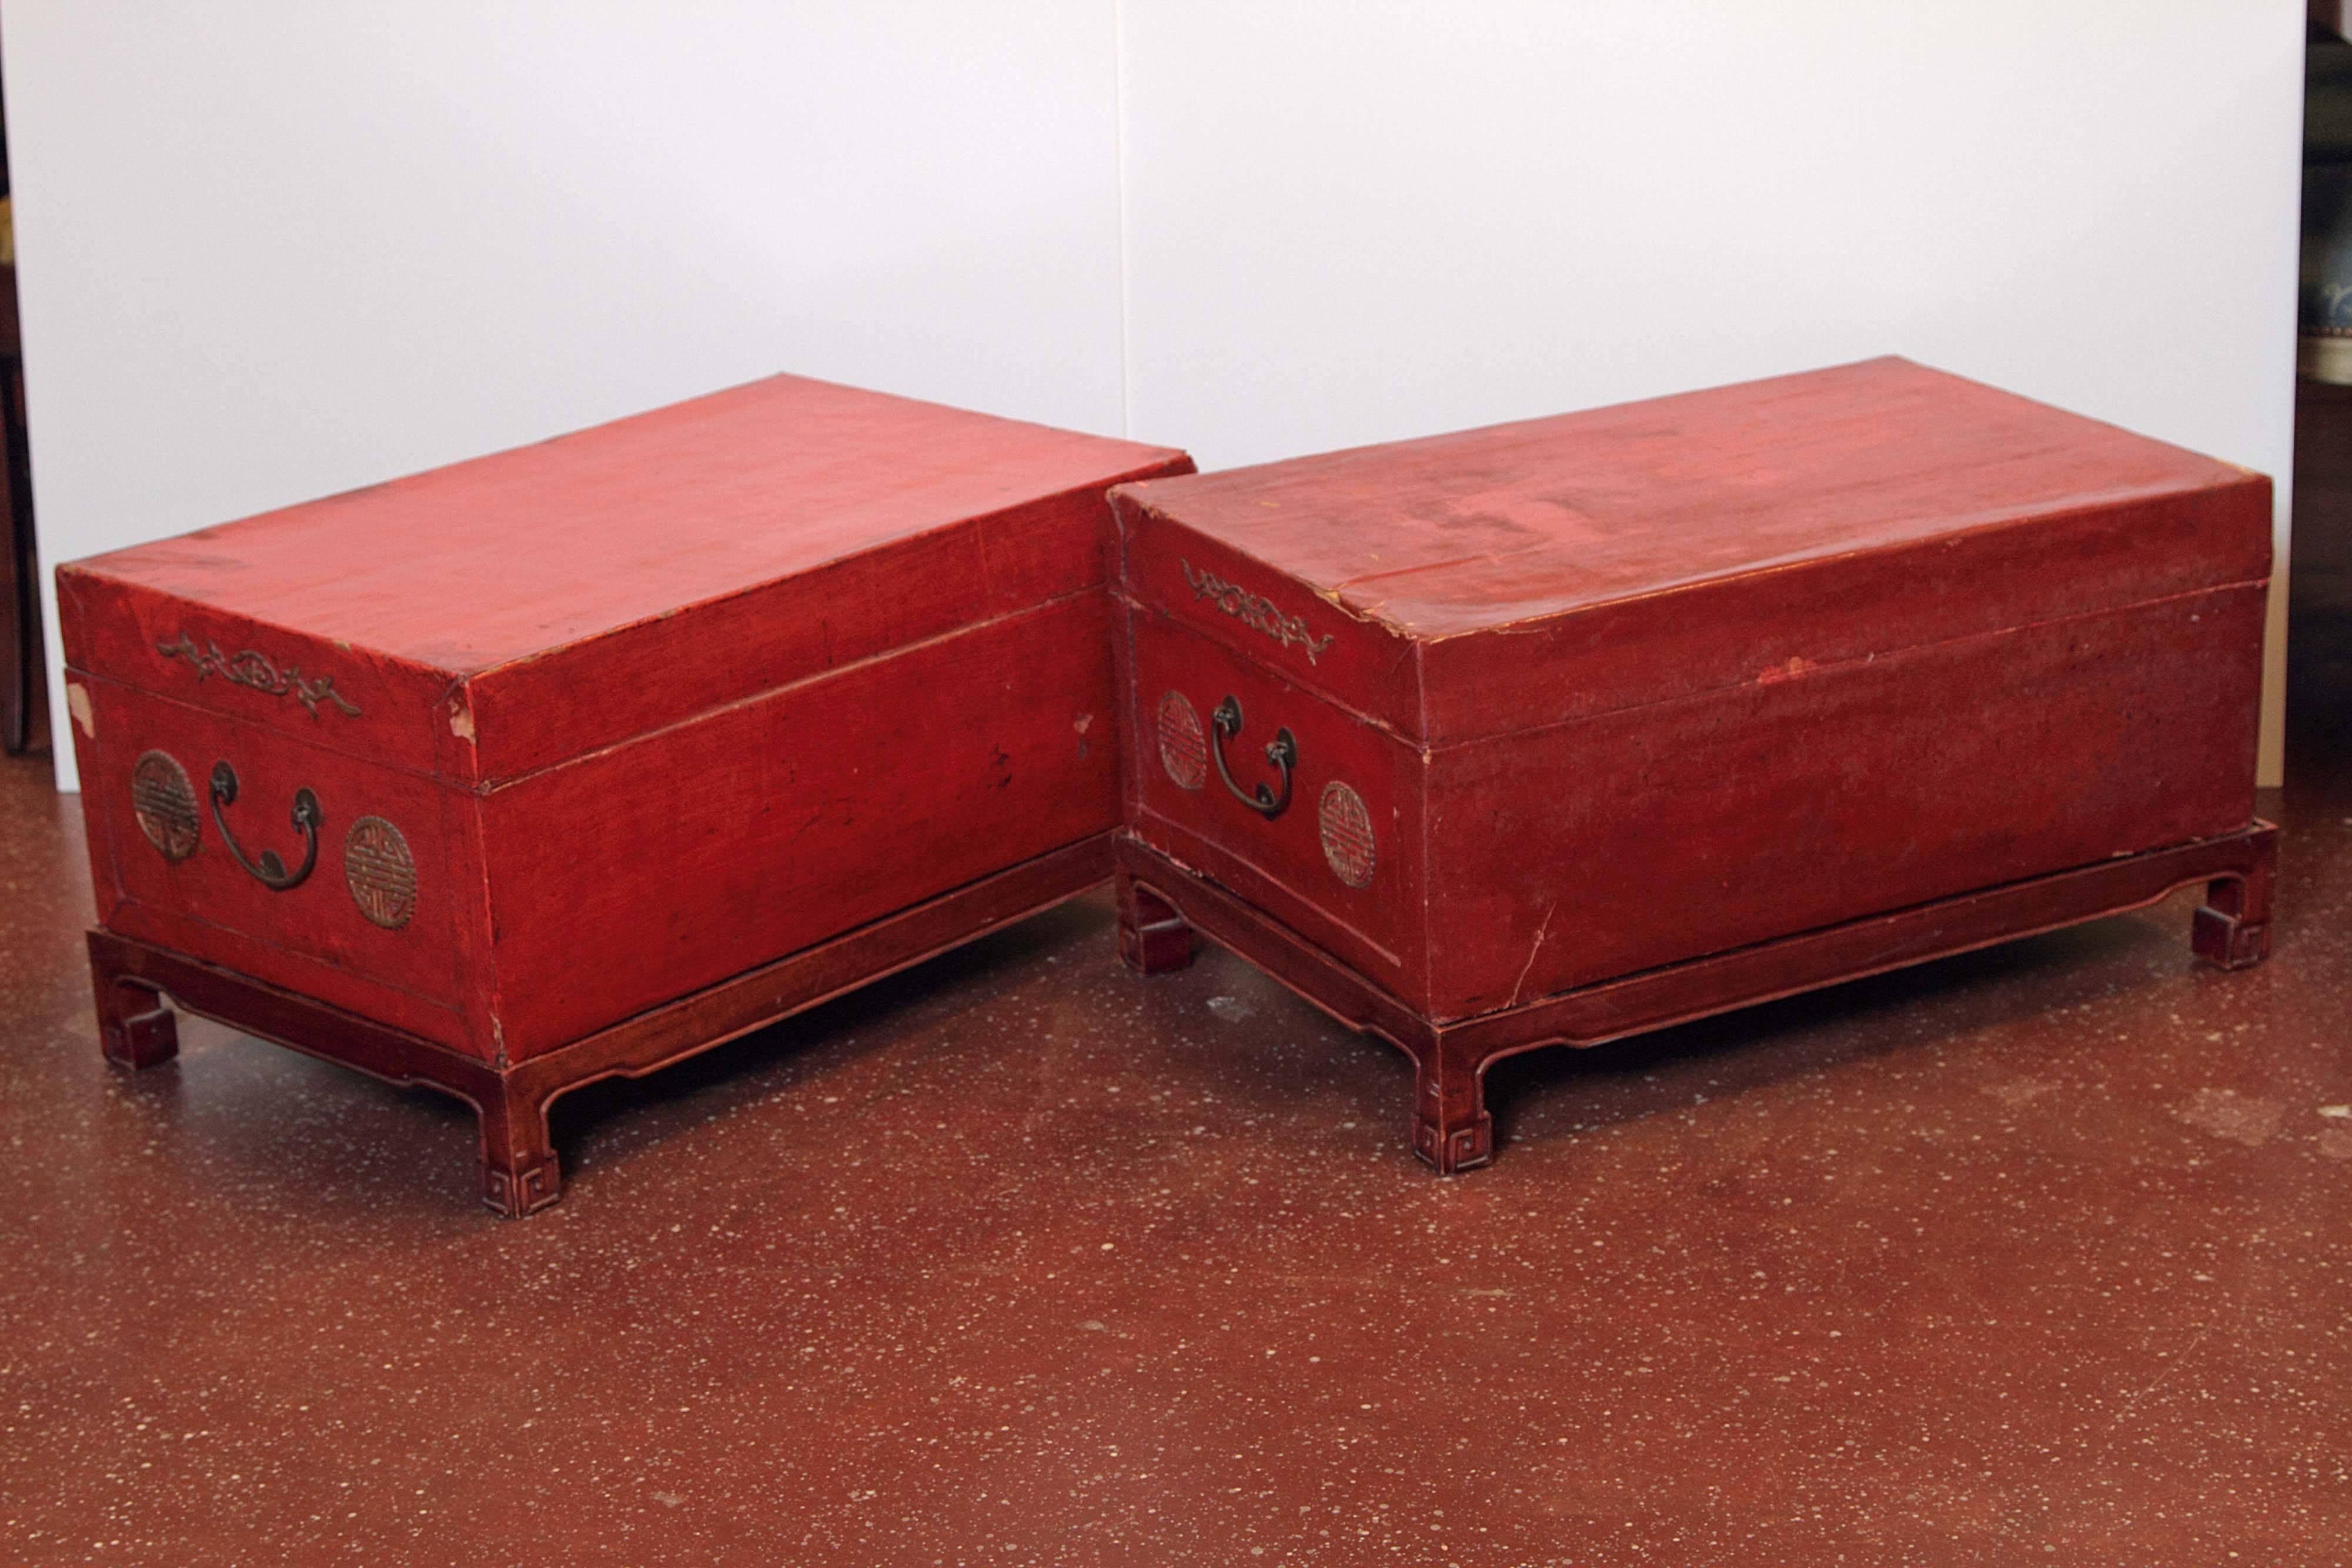 Pair of Early 20th Century Chinese Red Lacquered Leather Trunks on Stands 1